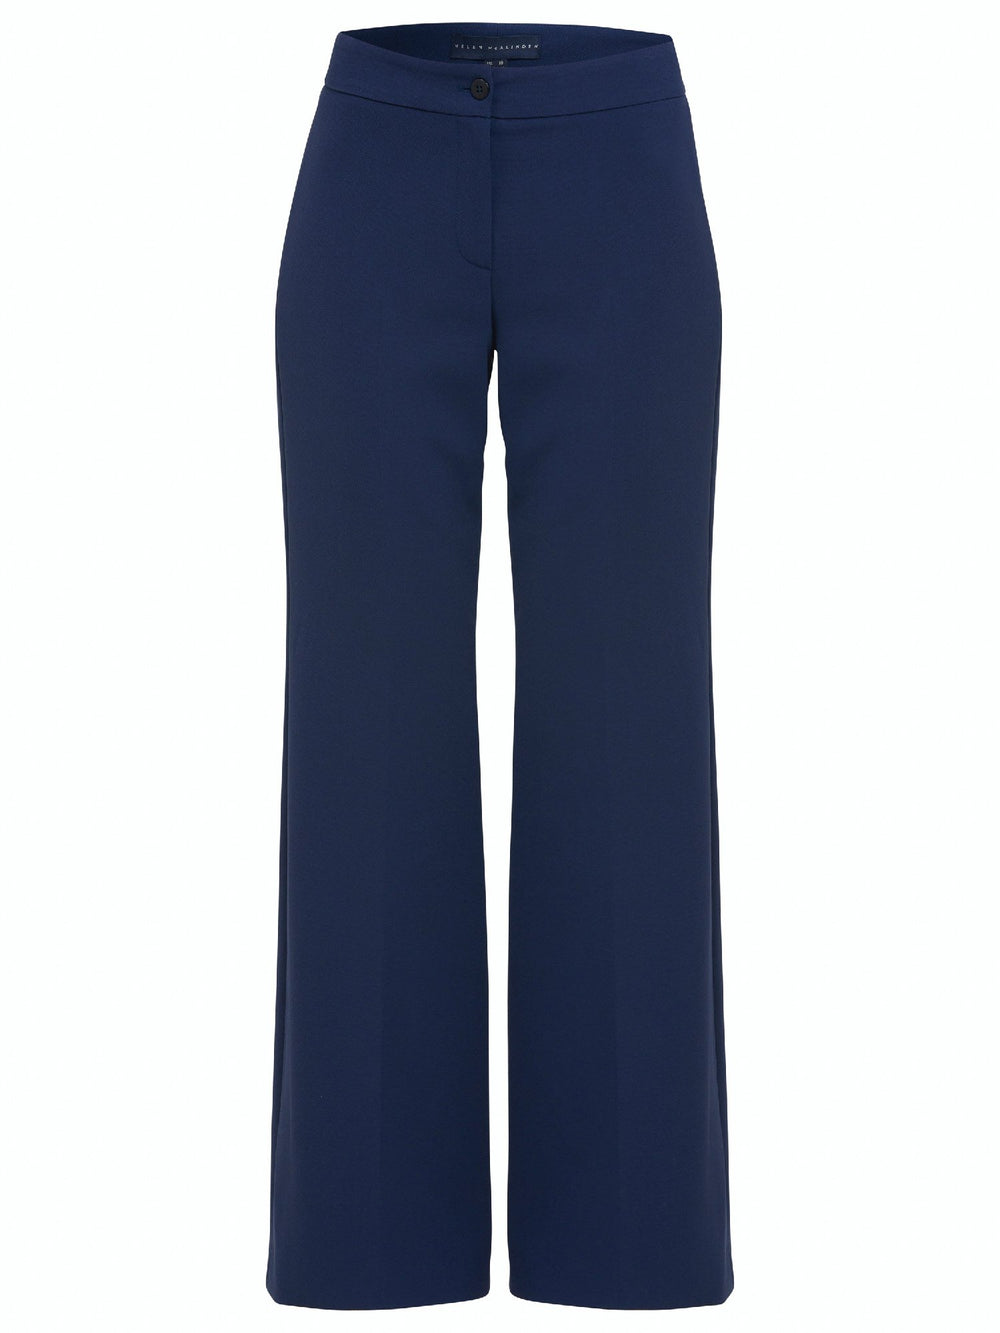 Kelly, a storm blue flare pant. Crafted in sustainable double crepe with a hint of stretch. Revisit the 70's for this season’s game-changing look. Flares are sophisticated, comfortable & leg-lengthening. Guaranteed to flatter the form & never far from fashion’s front line.